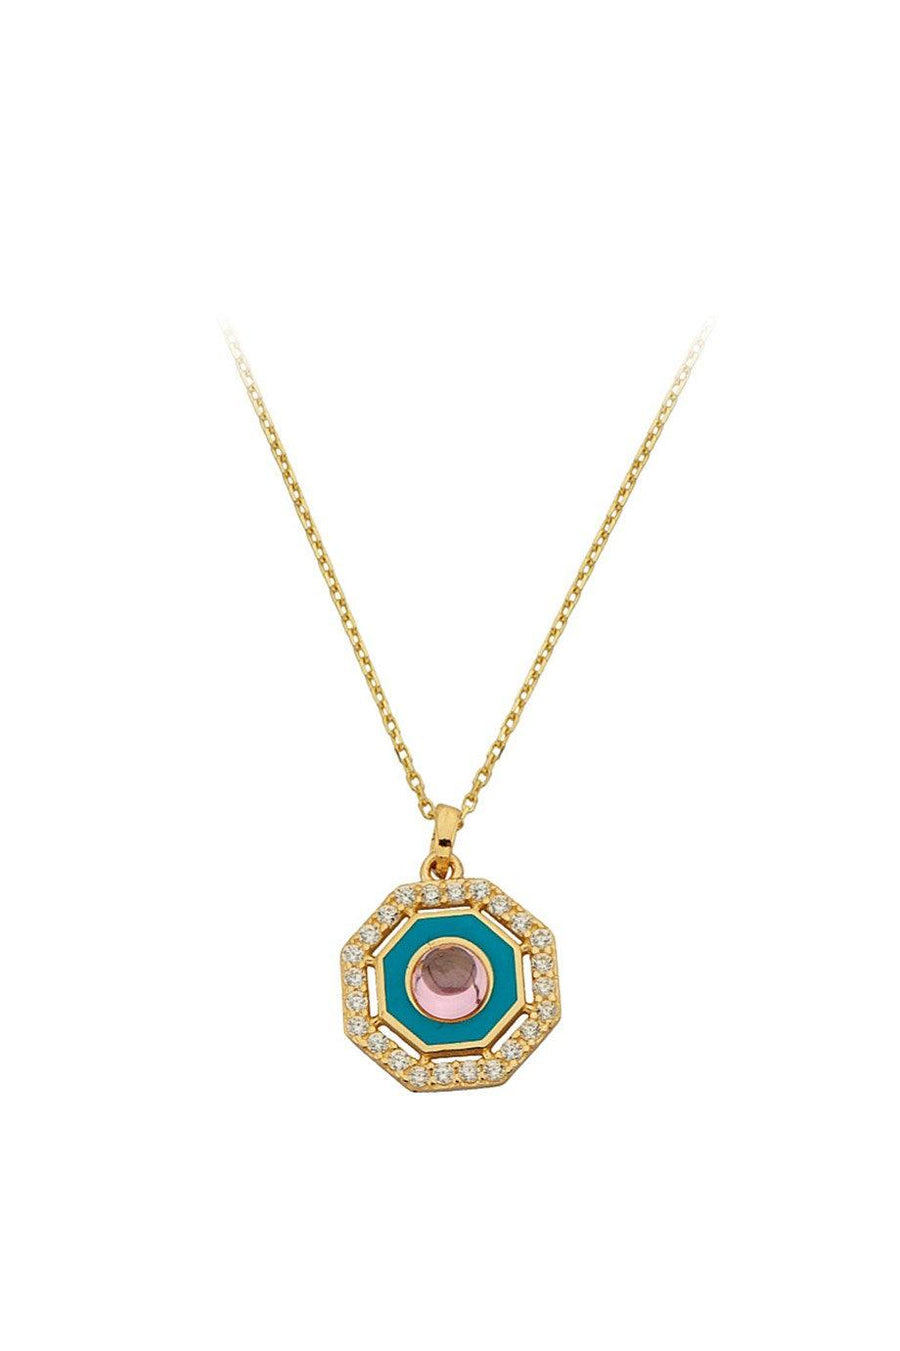 Pink Stone Necklace With Gold Enamel